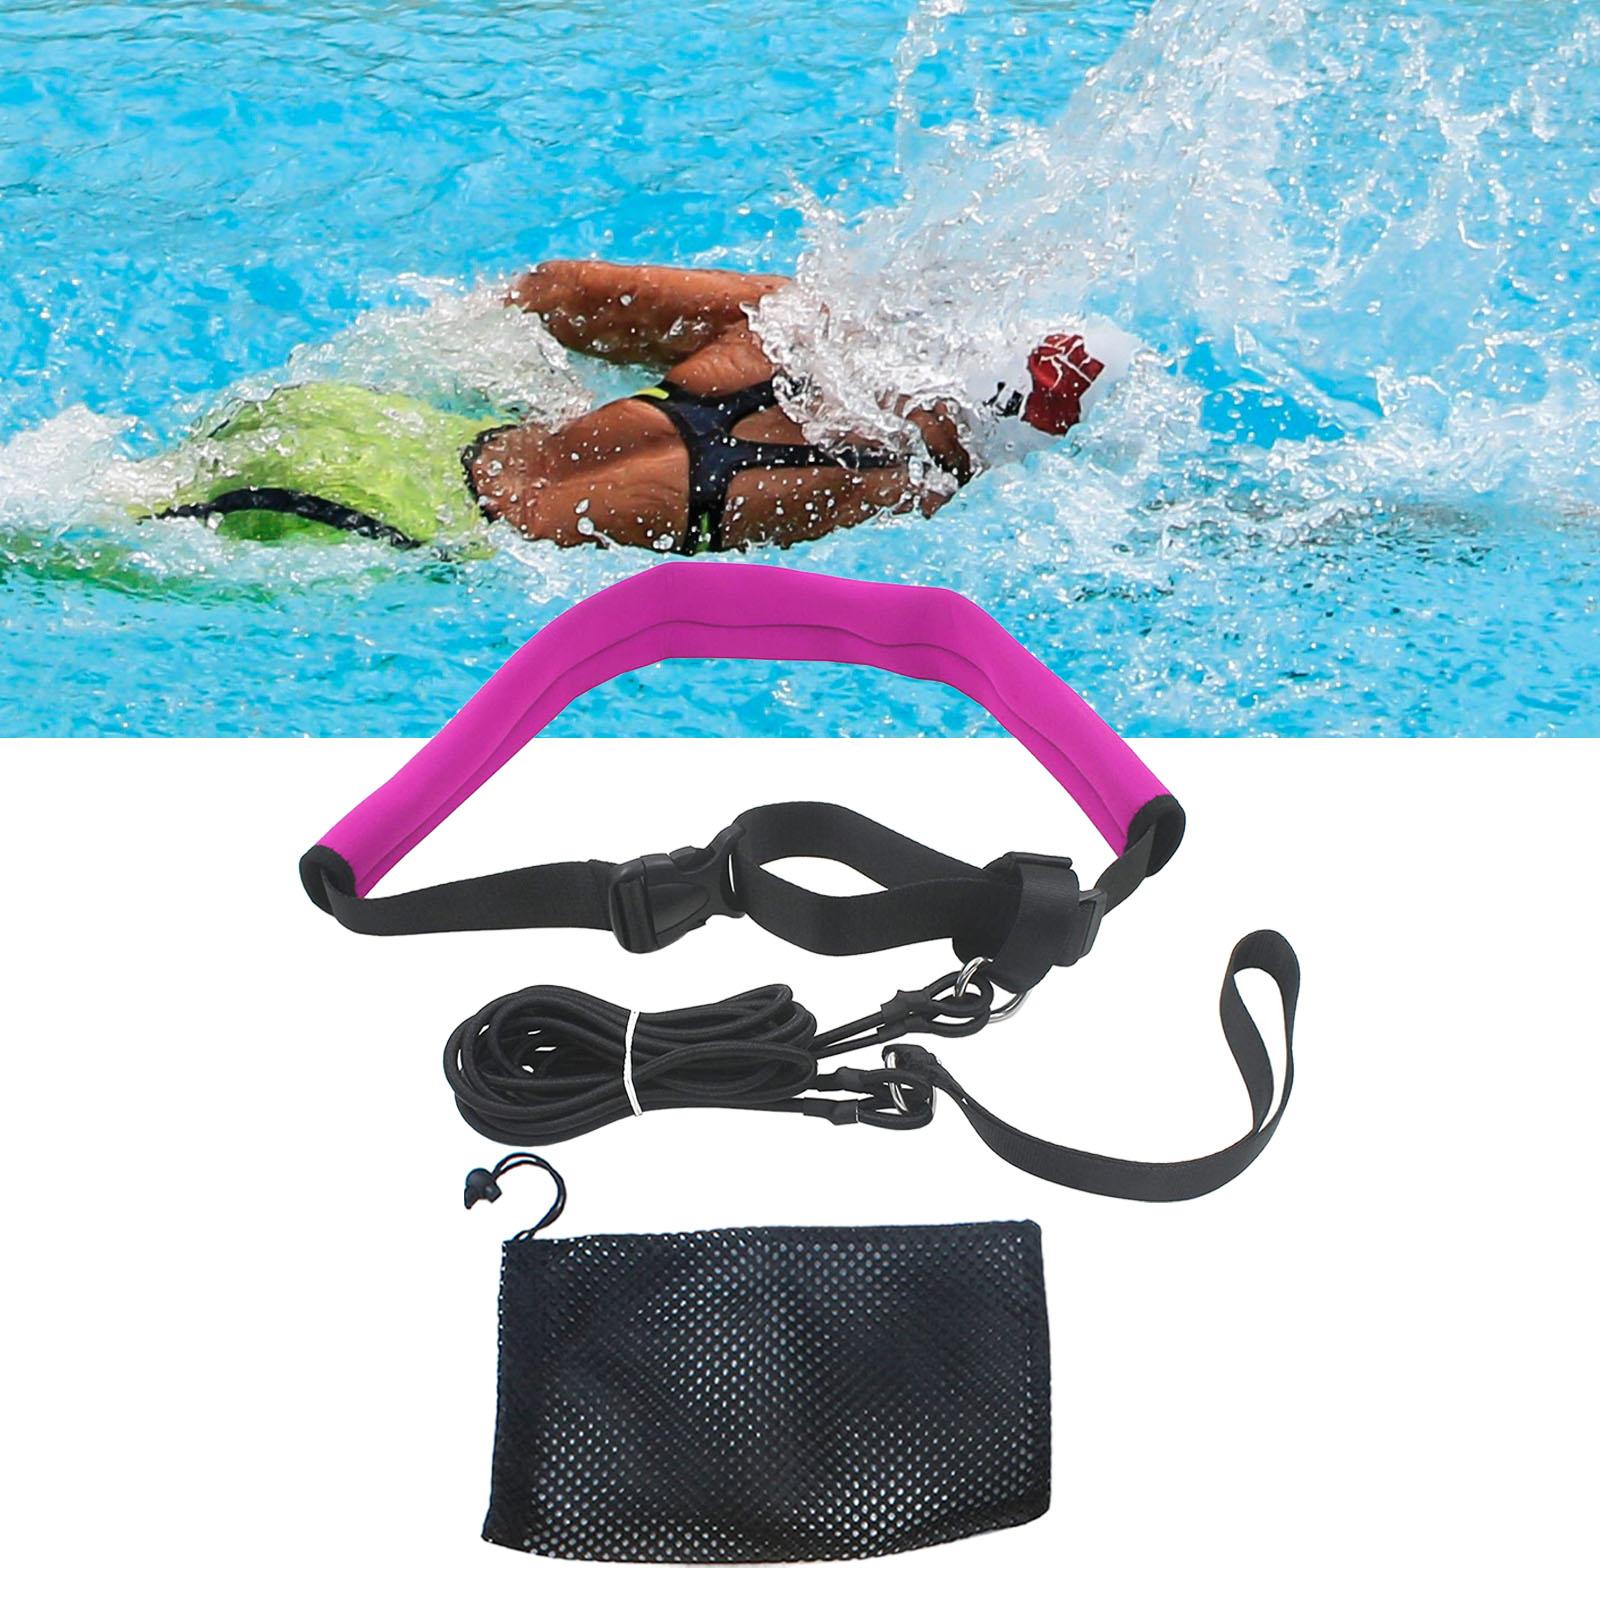 Swim Resistance Tether Stationary Swimming for Adults Professionals Athletes Pink